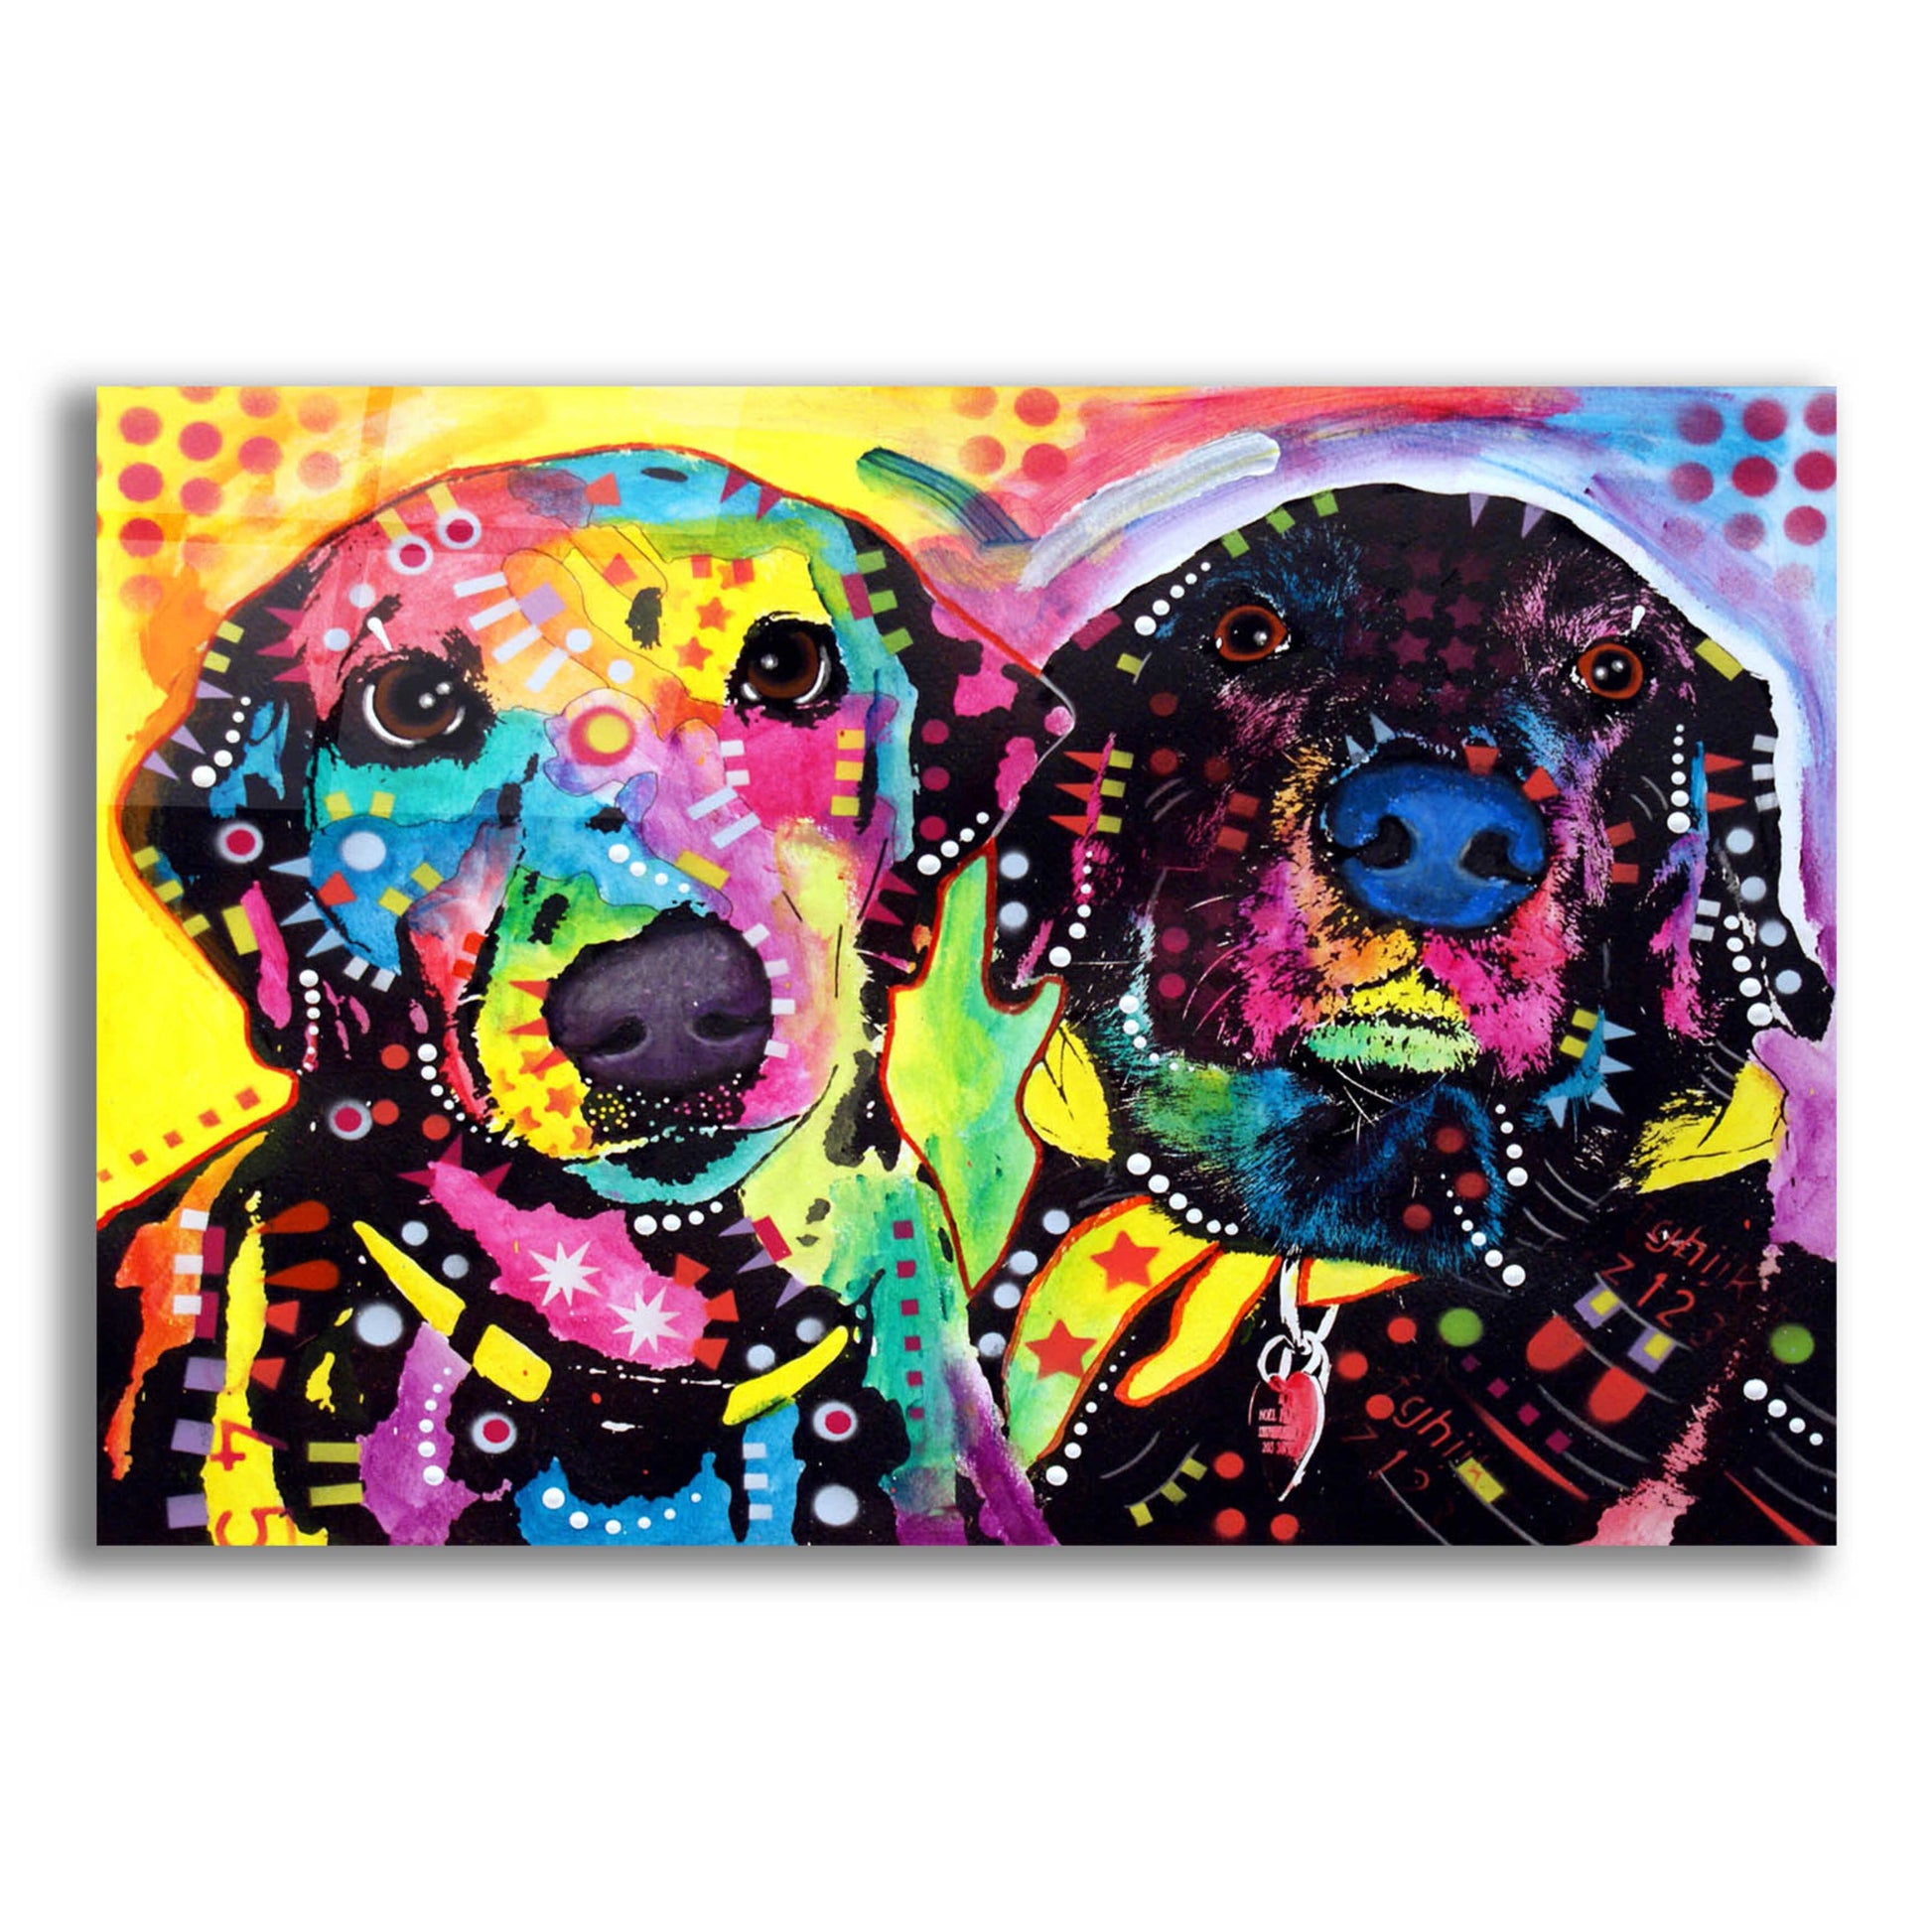 Epic Art 'Daisy and Noel' by Dean Russo, Acrylic Glass Wall Art,24x16